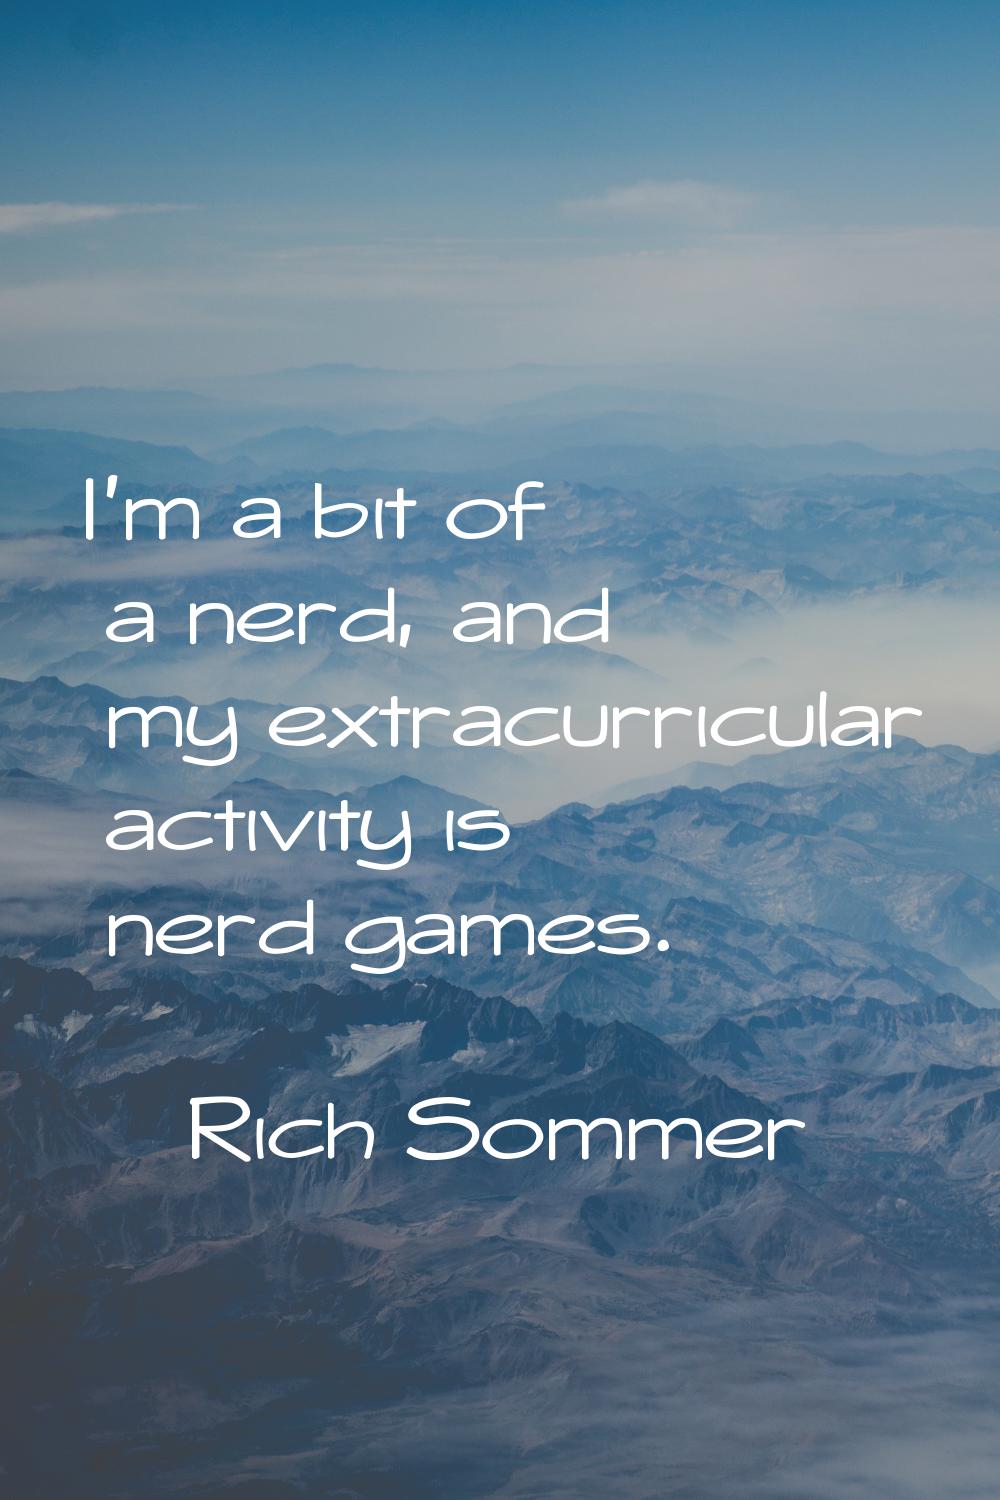 I'm a bit of a nerd, and my extracurricular activity is nerd games.